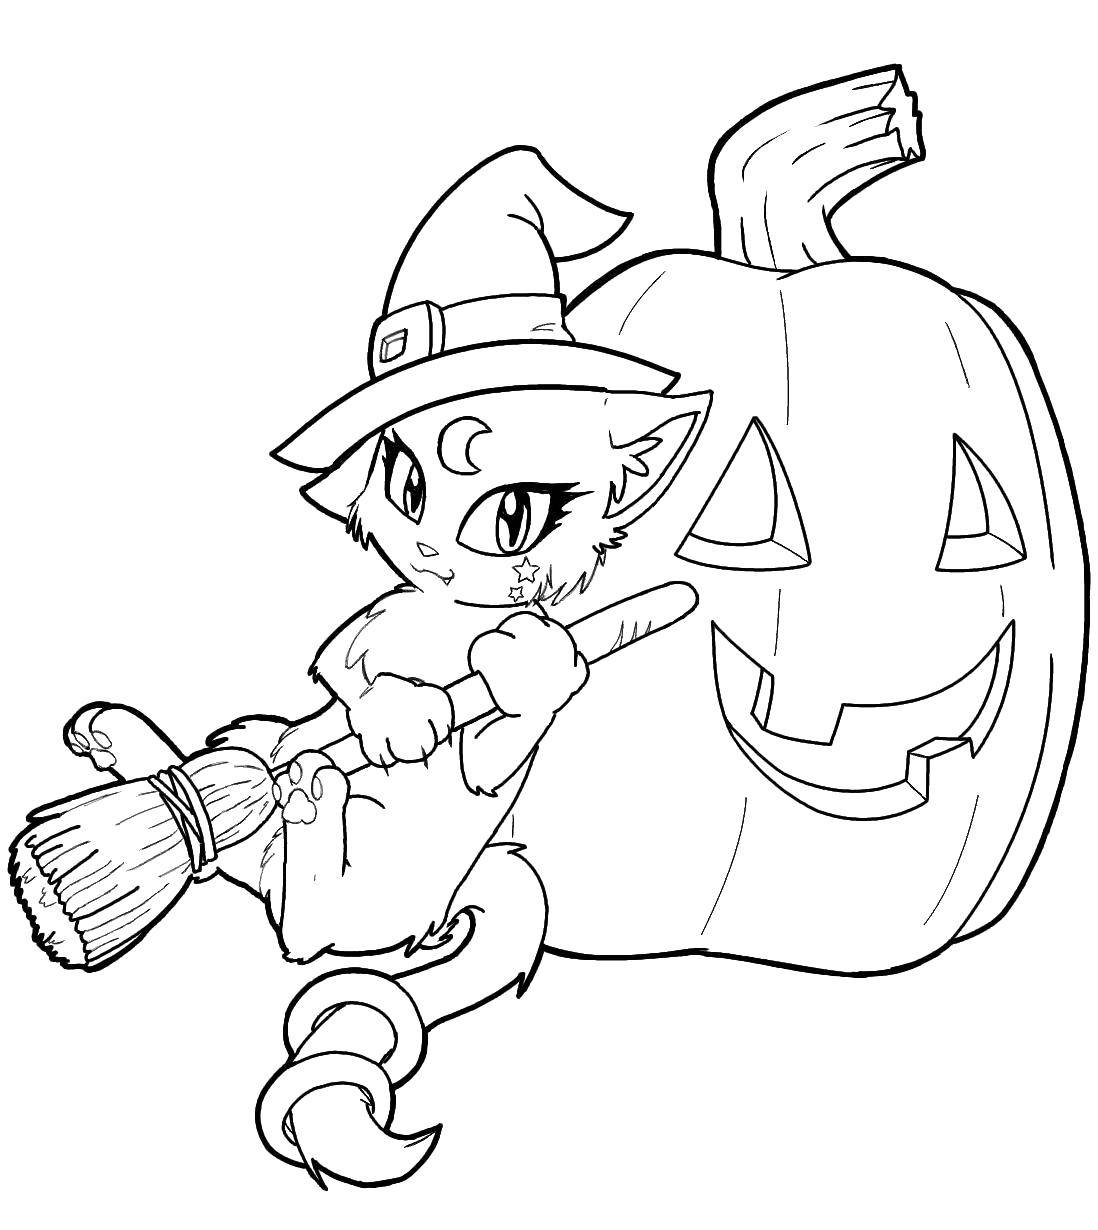 Coloring Kitty witch. Category Halloween. Tags:  Halloween, pumpkin, cat.